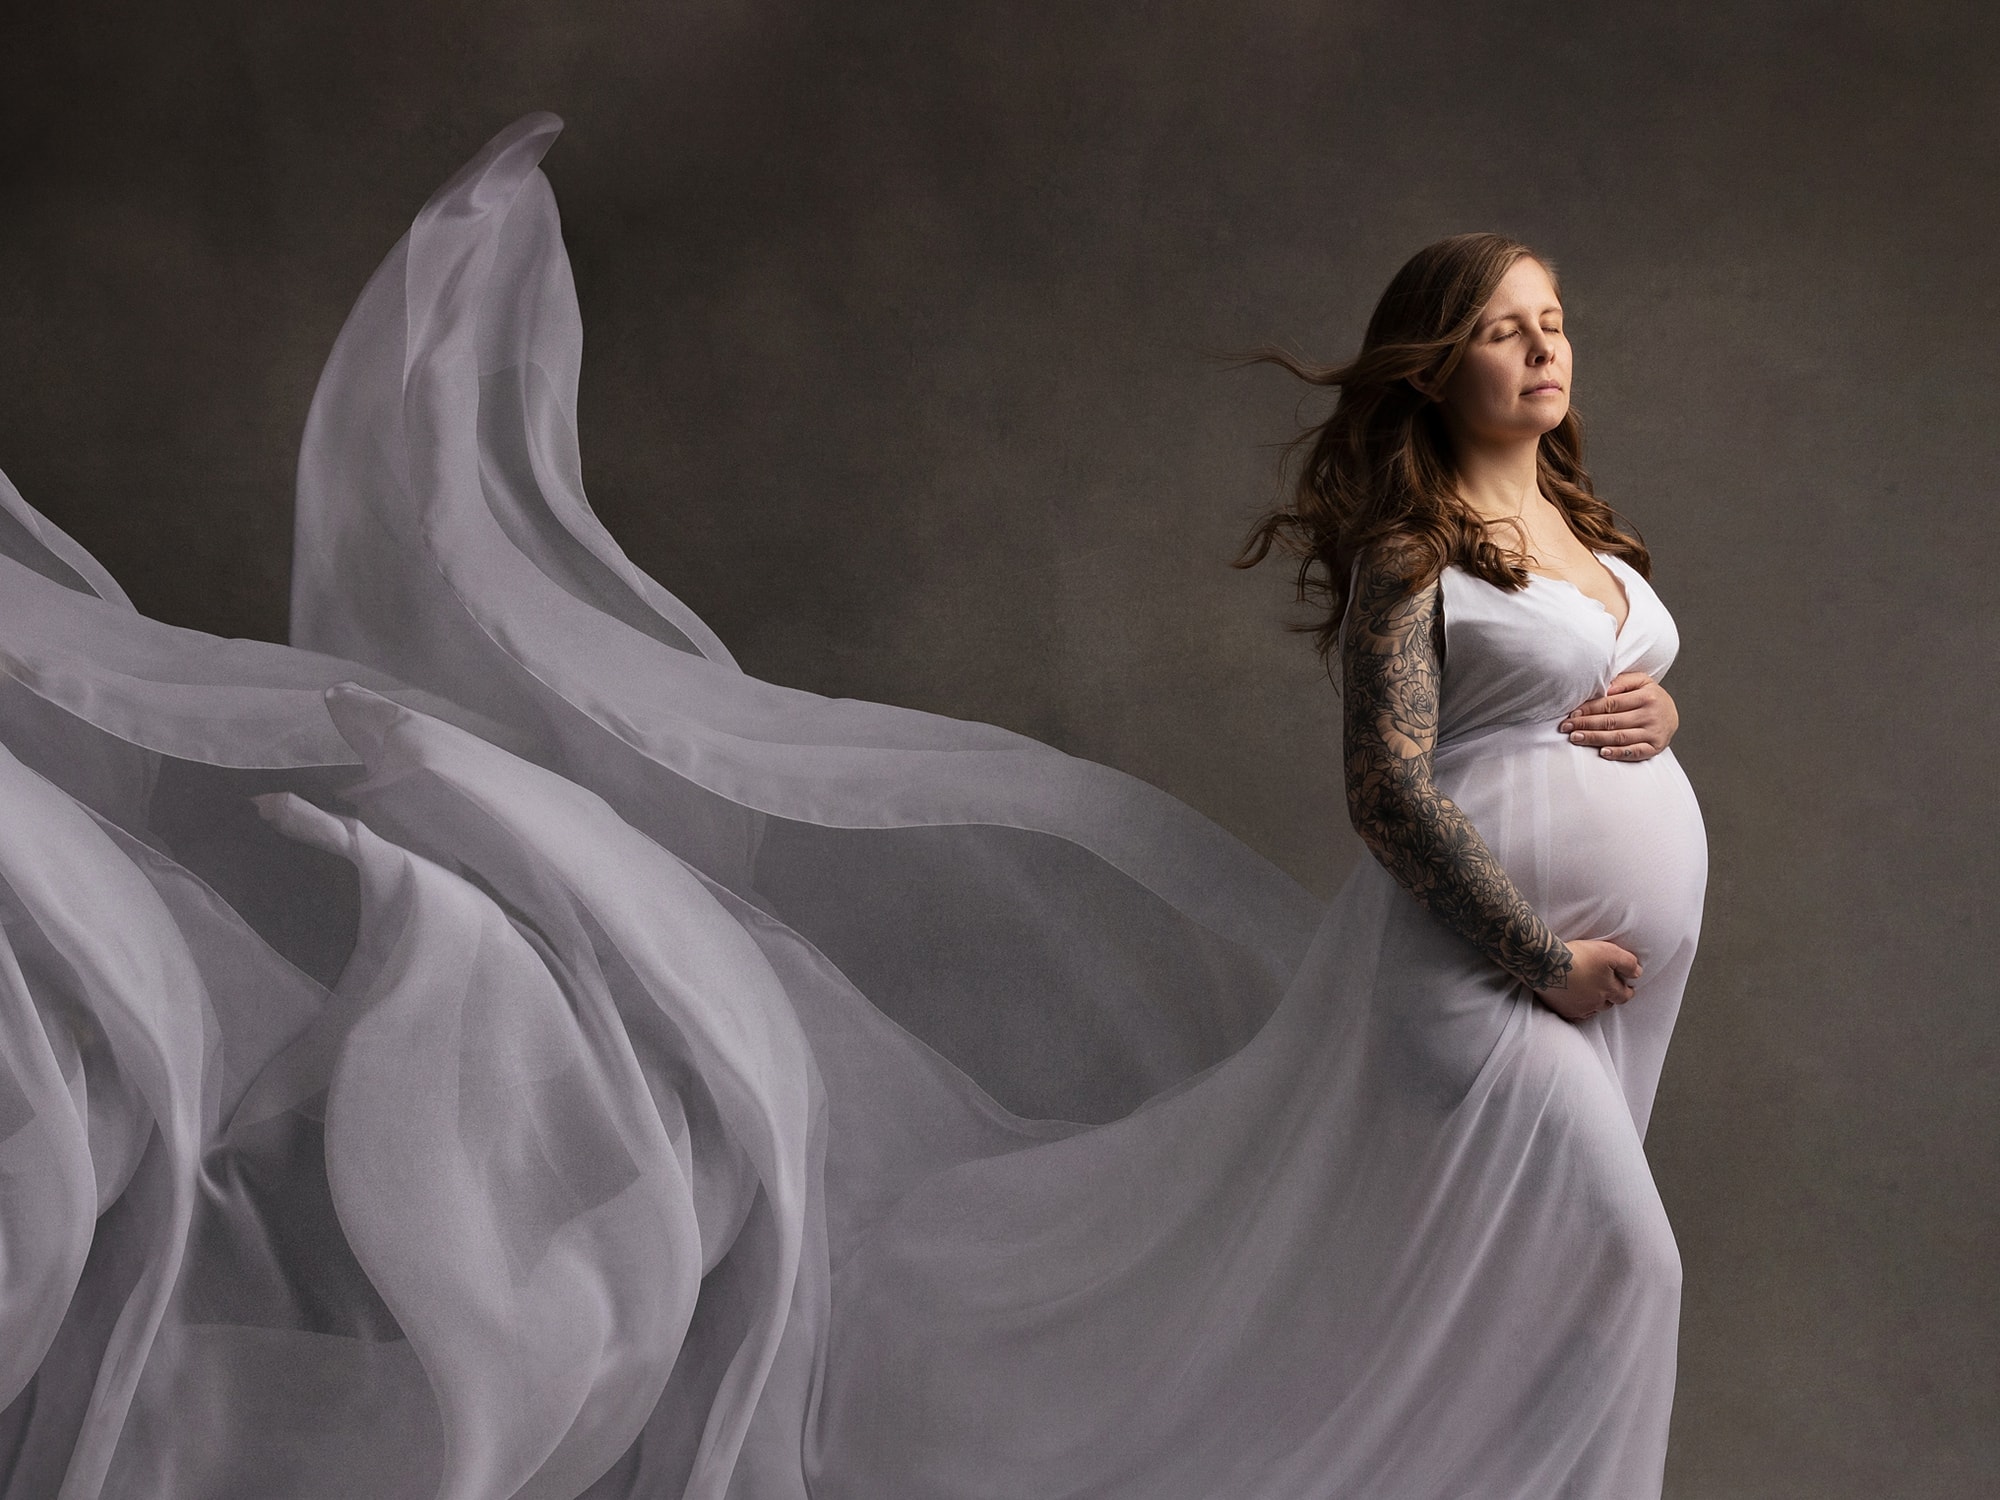 Portrait of Pregnant woman holding her belly with a white dress blowing behind her